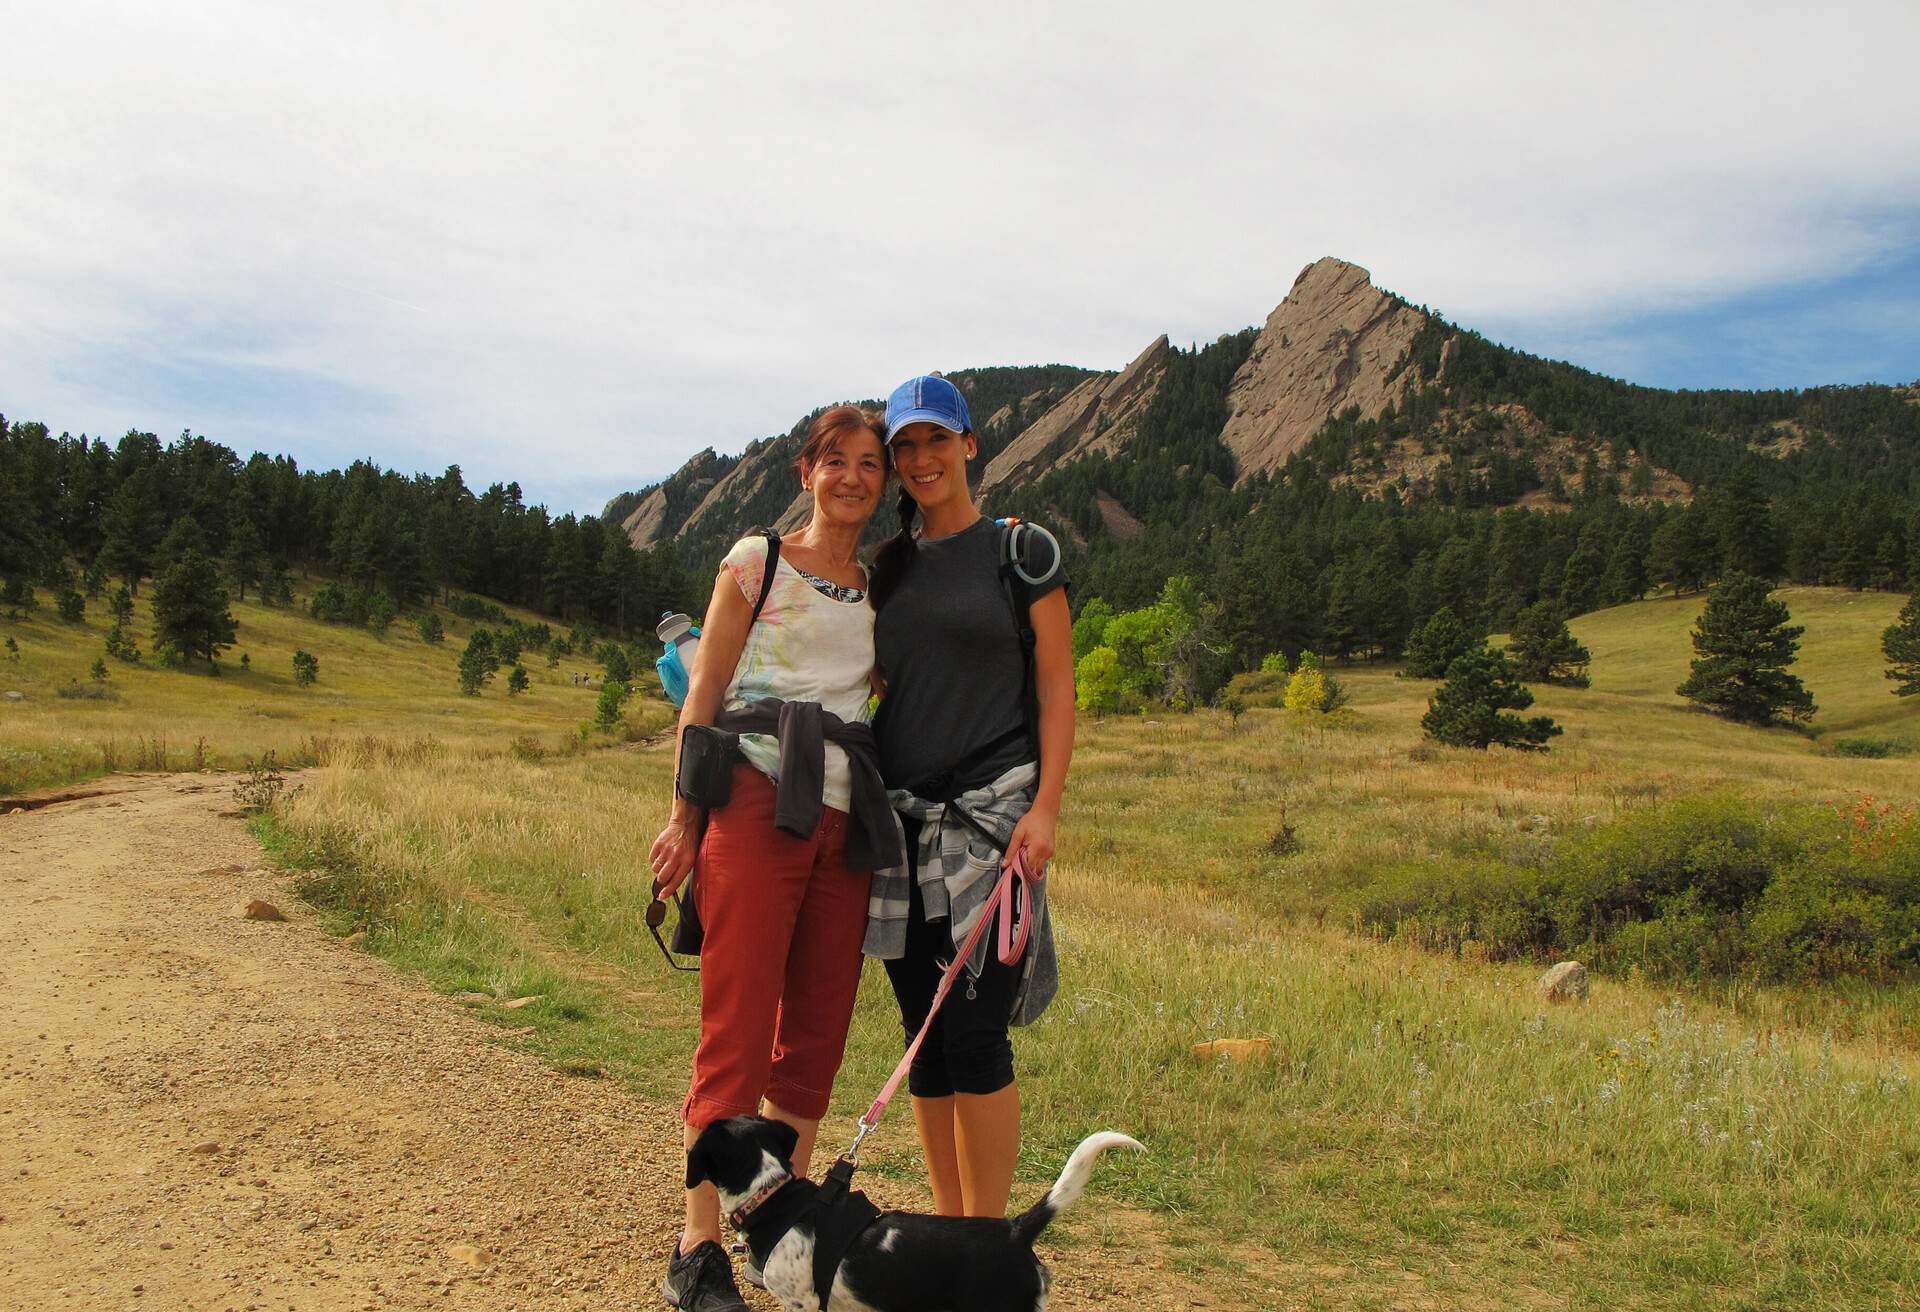 DEST_USA_COLORADO_BOULDER_THE-FLATIRONS_THEME_PEOPLE_MOTHER-AND-DAUGHTER_GettyImages-503910745